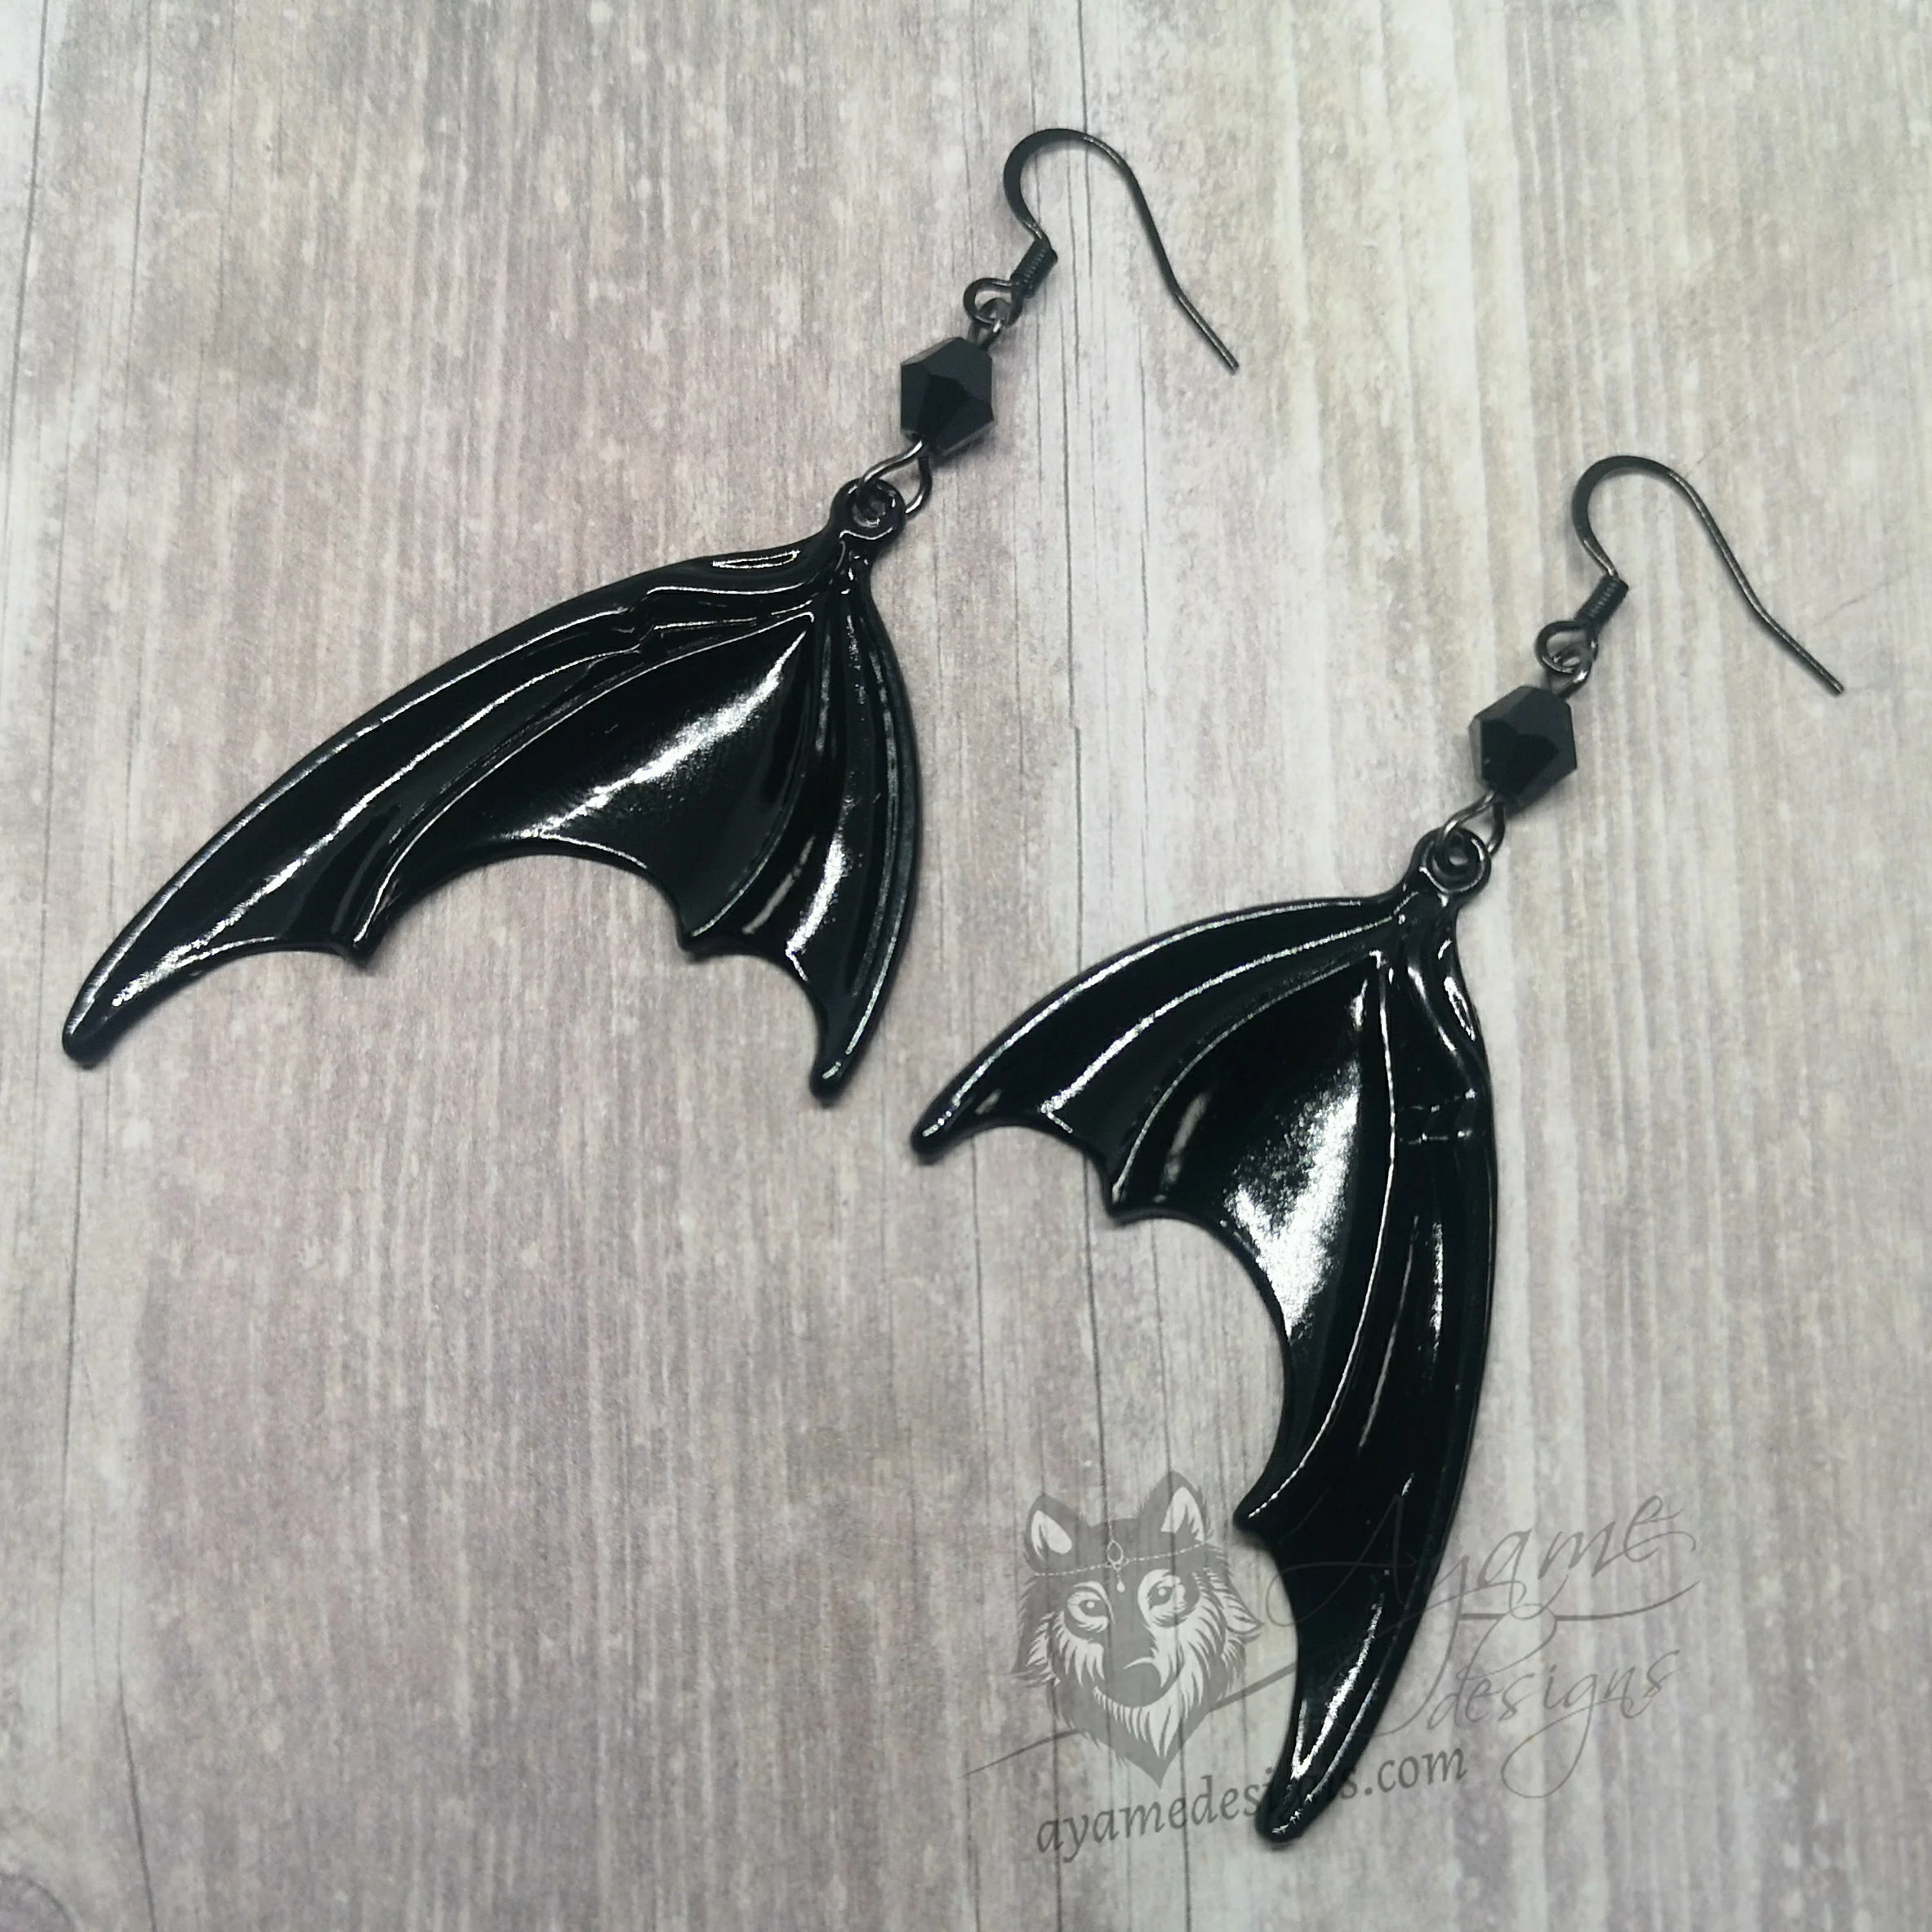 Handmade gothic earrings with large black bat wings and black Austrian crystal beads on stainless steel earring hooks